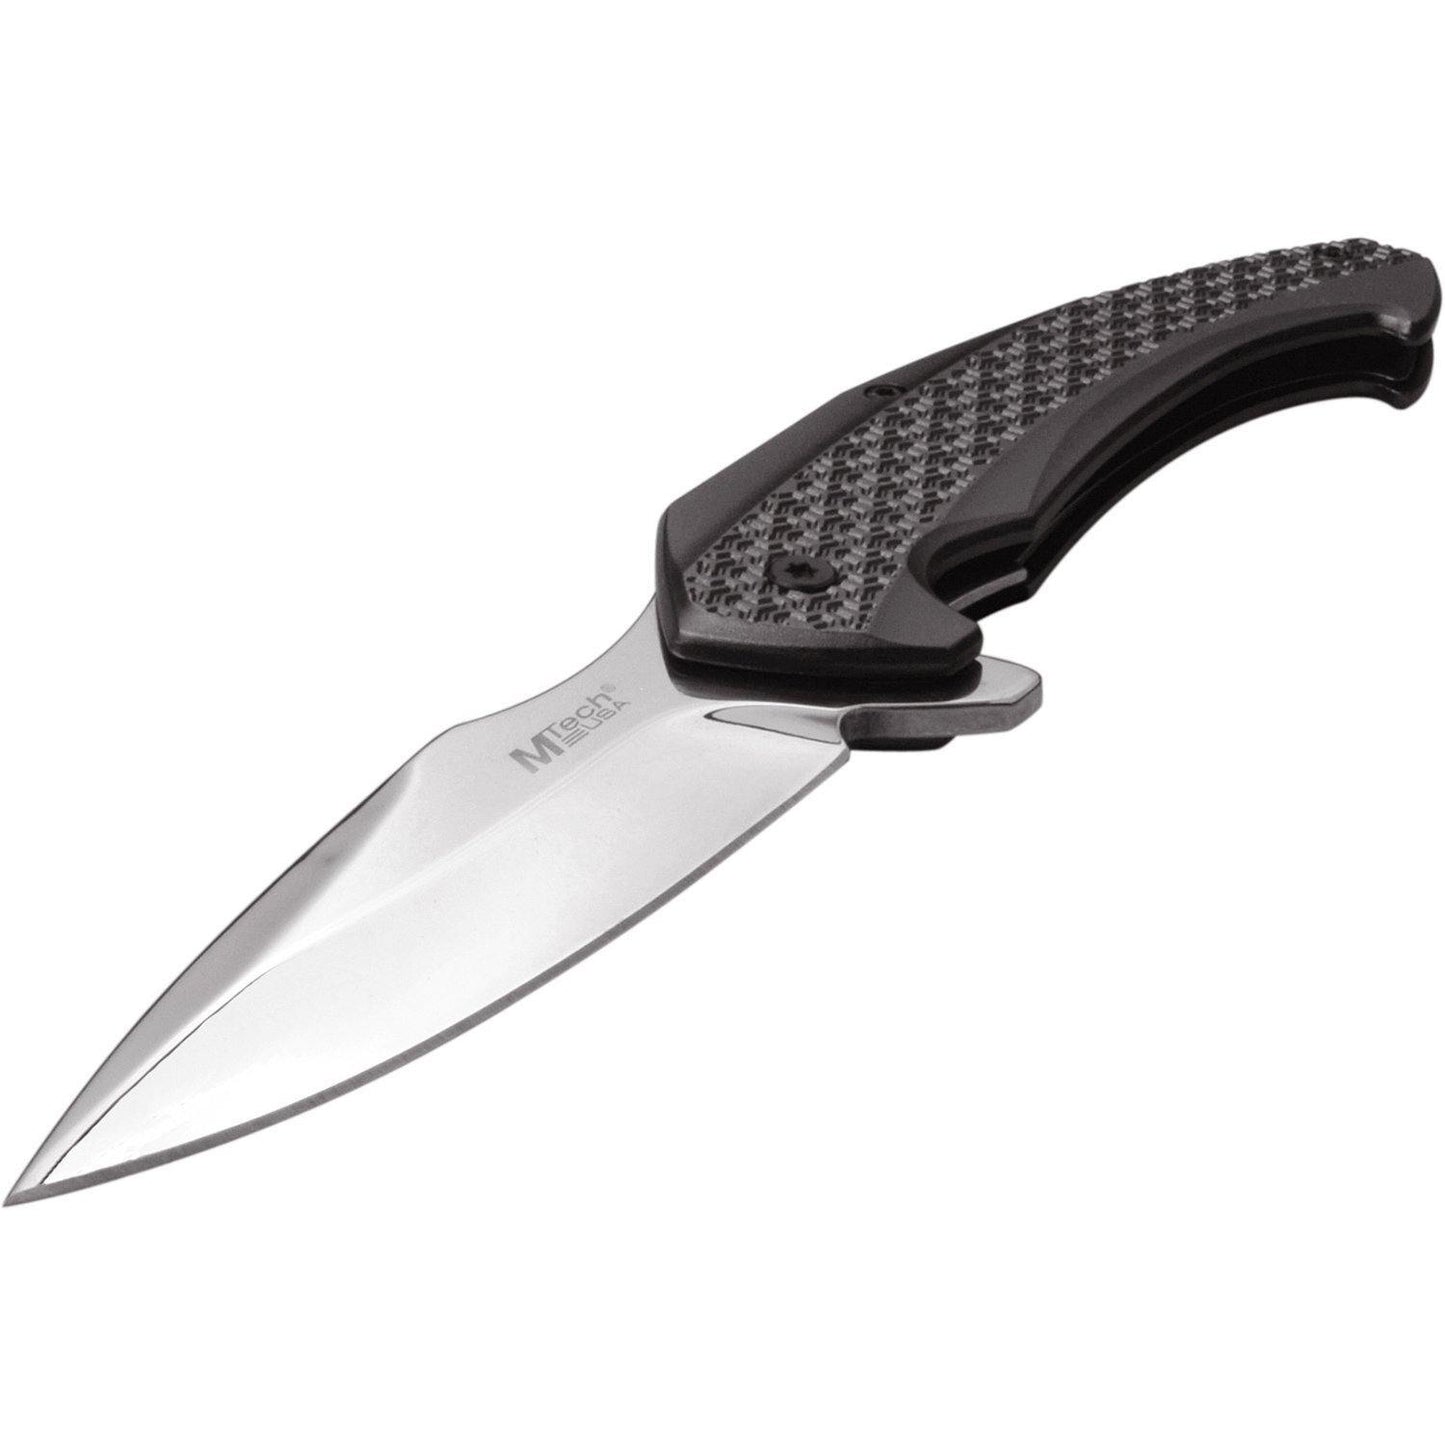 Mtech Spear Point Fine Edge Blade Folding Knife - 8 Inches Overall Grey #mt-1063Gy - Xhunter New Zealand